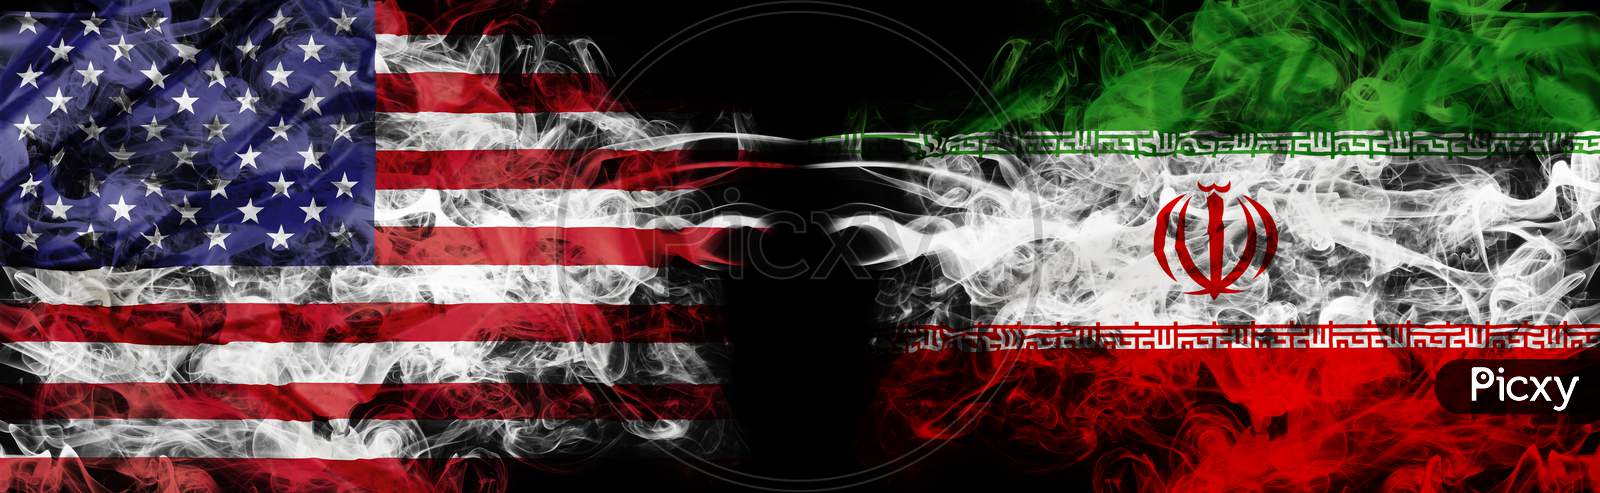 United States And Iran Crisis With Smoky Mystic Flags